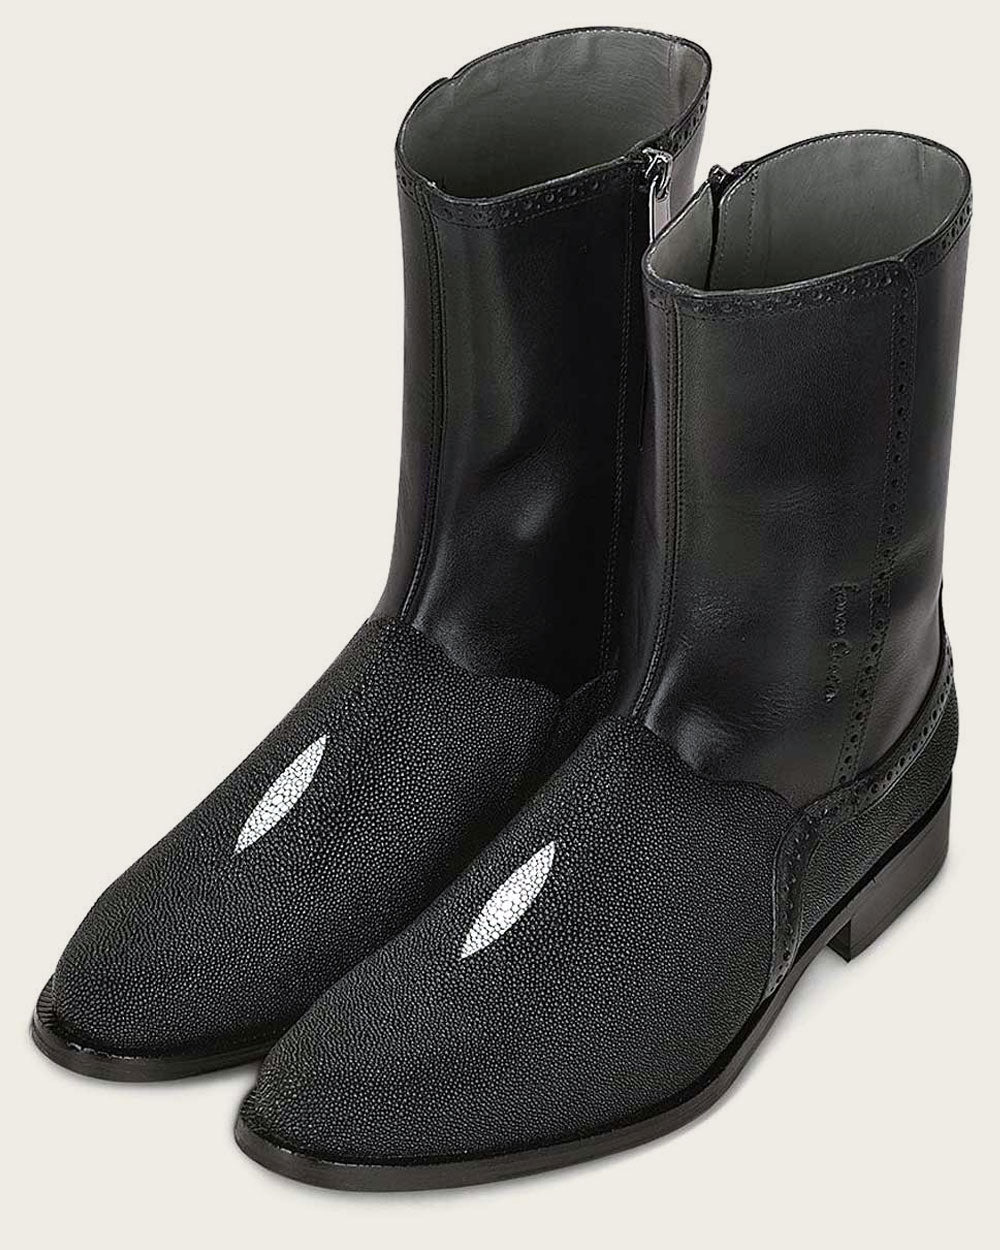 Cuadra Black Boots: Superior grip on various terrains with TPU soles. 